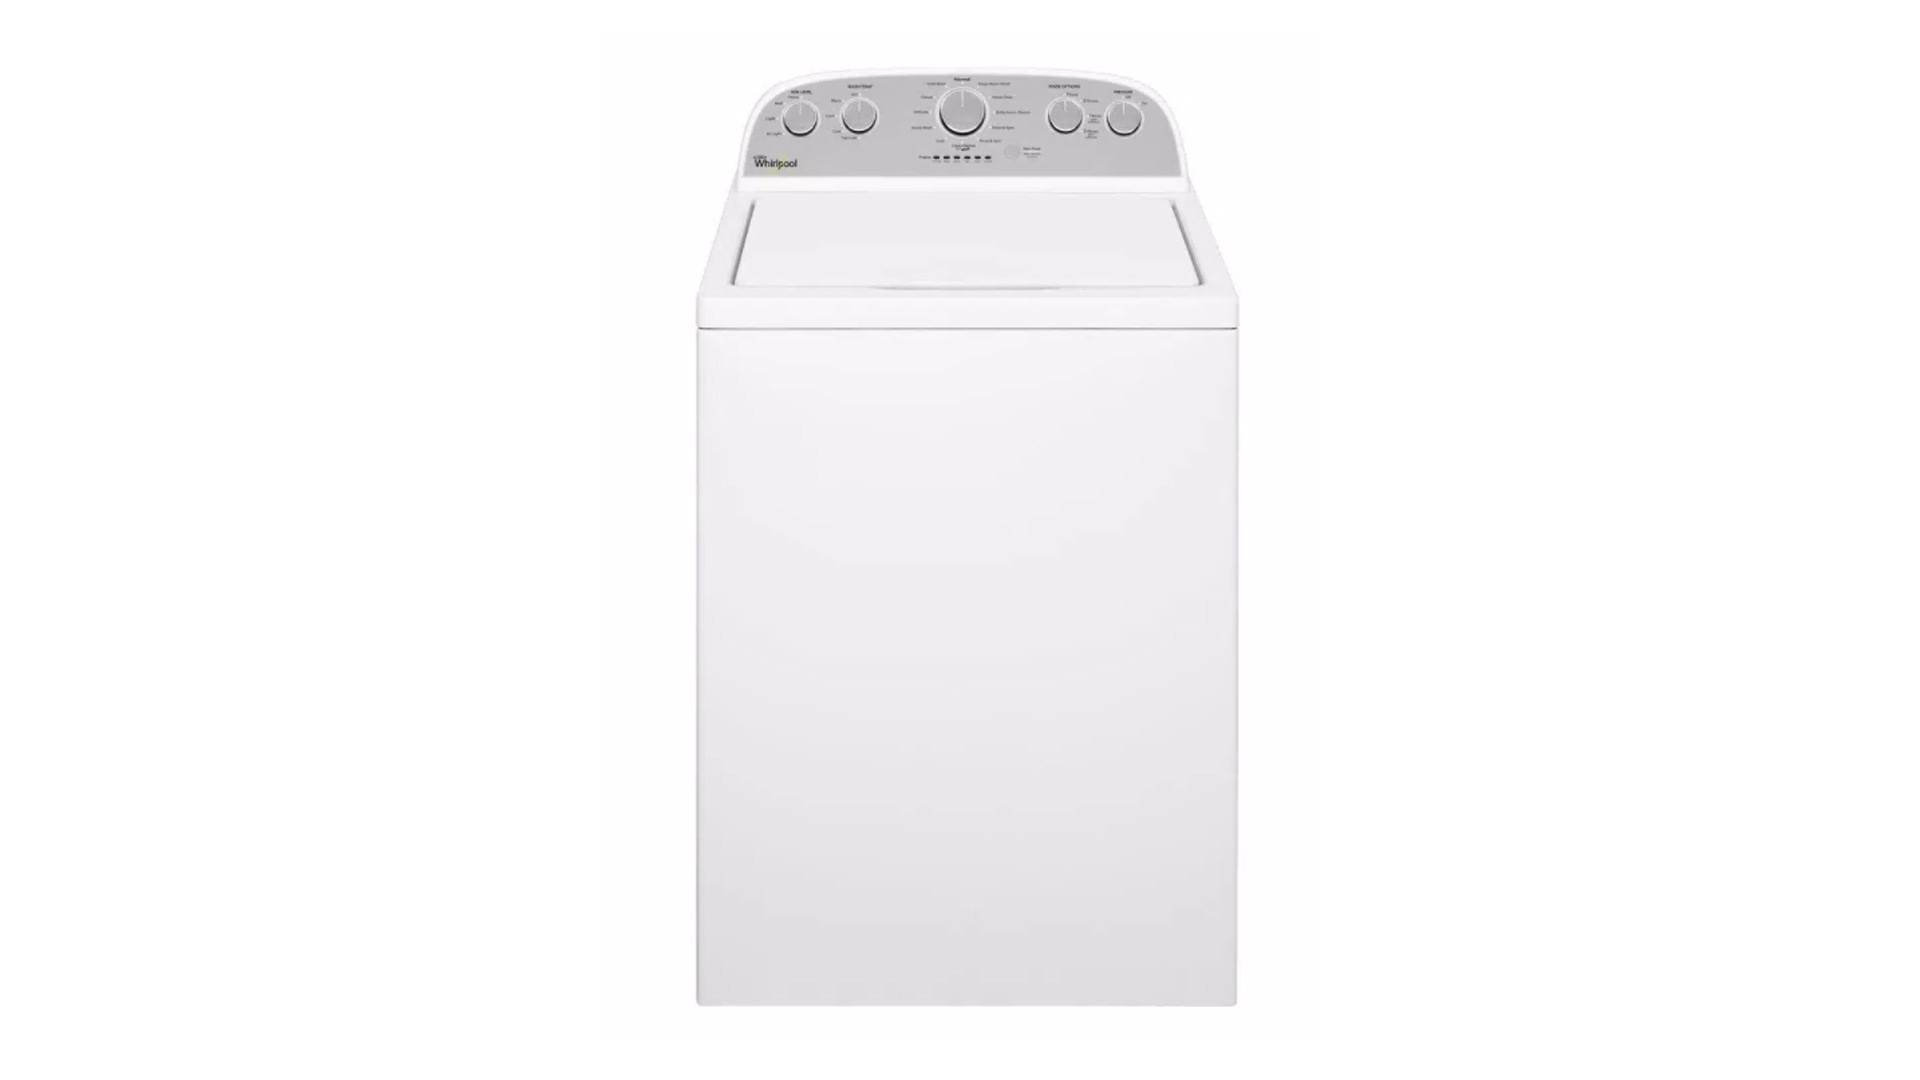 Best top load washers: Whirlpool WTW5000DW washer review